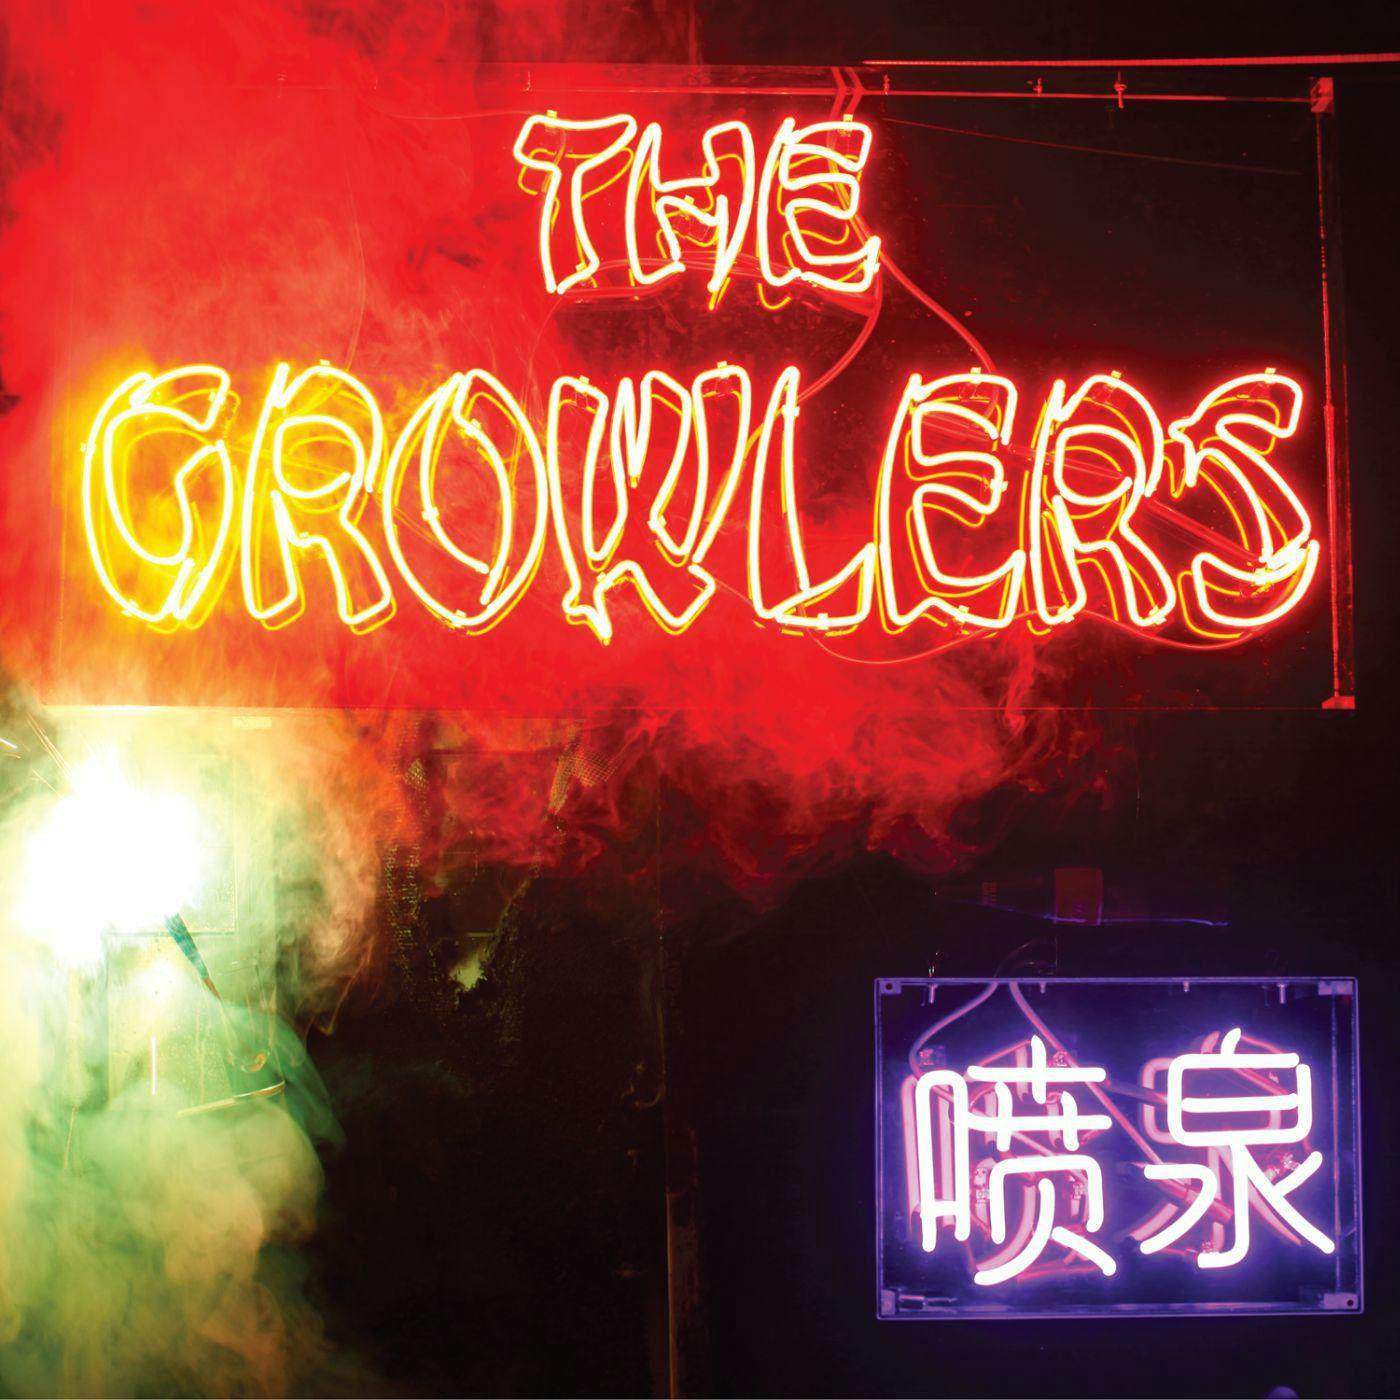 The Growlers Chinese Fountain Vinyl Record